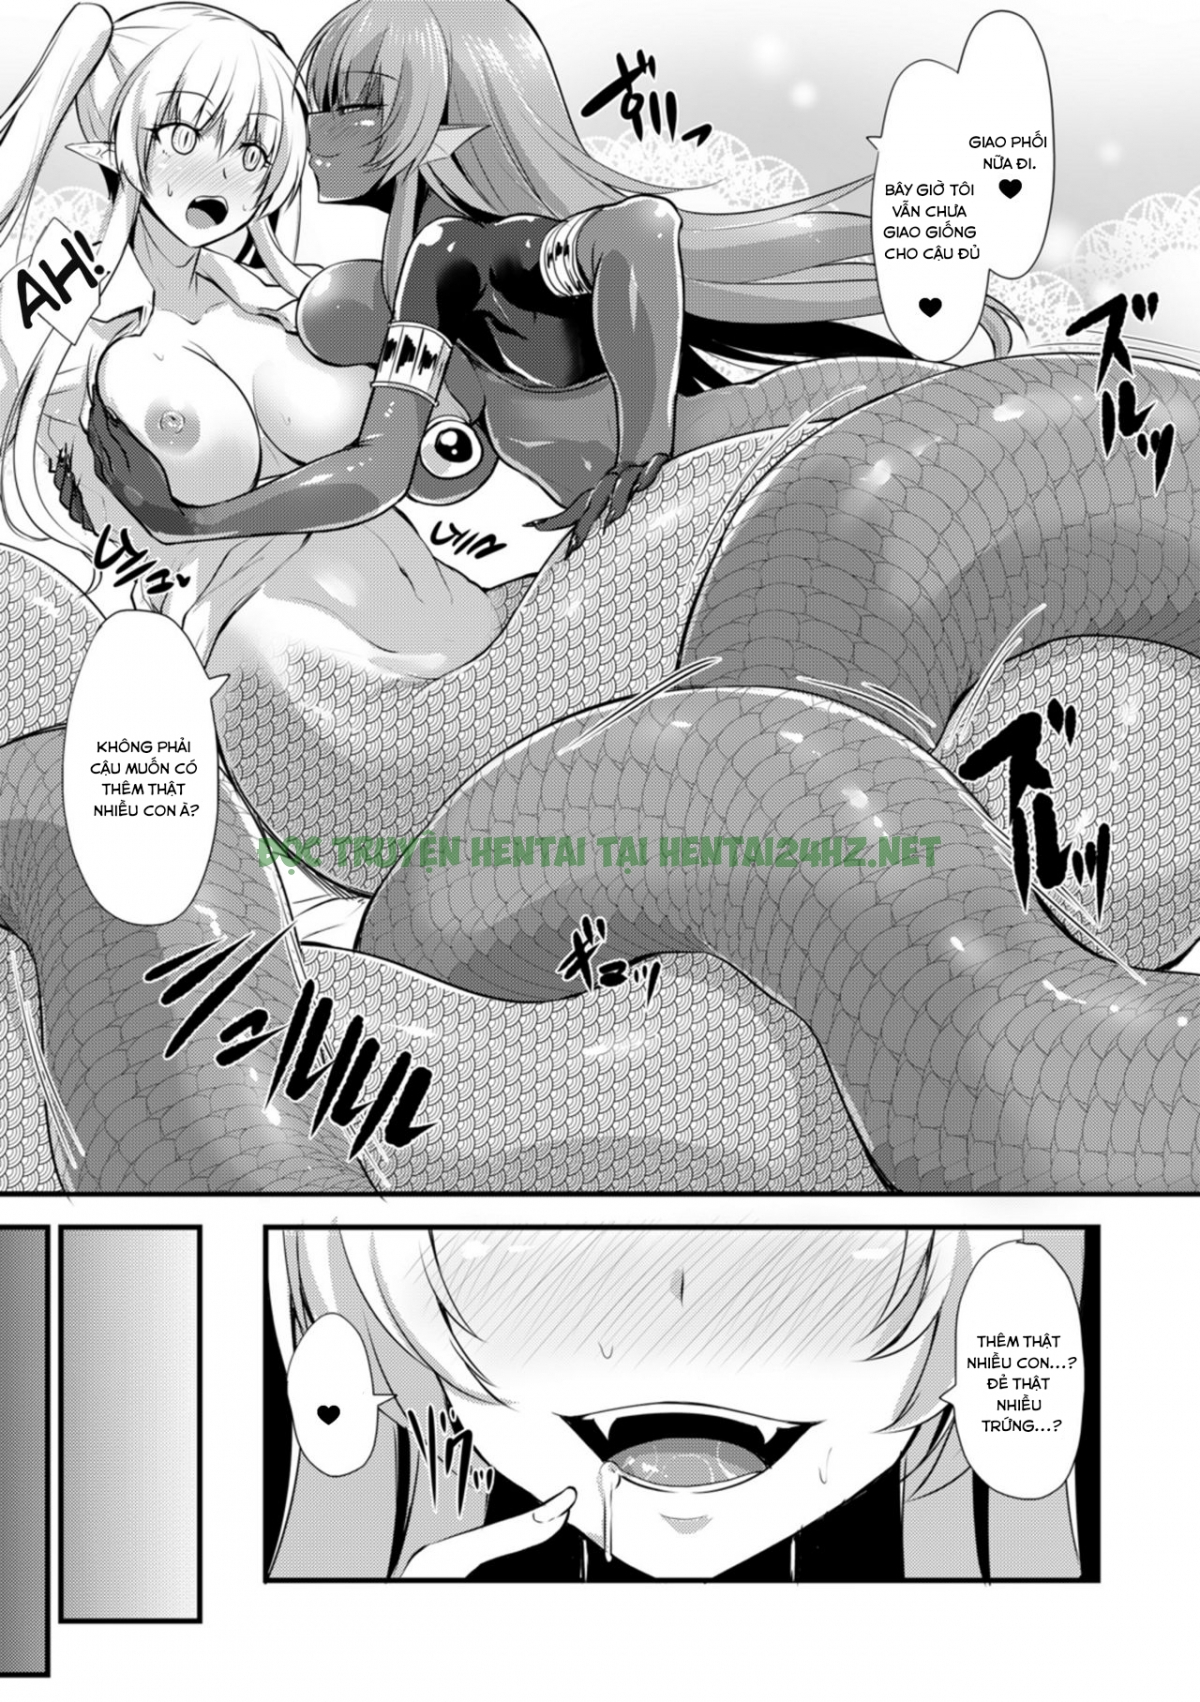 Xem ảnh Echidna-Sama Is Killing Time - Chapter 9 END - 1603544046669_0 - Hentai24h.Tv